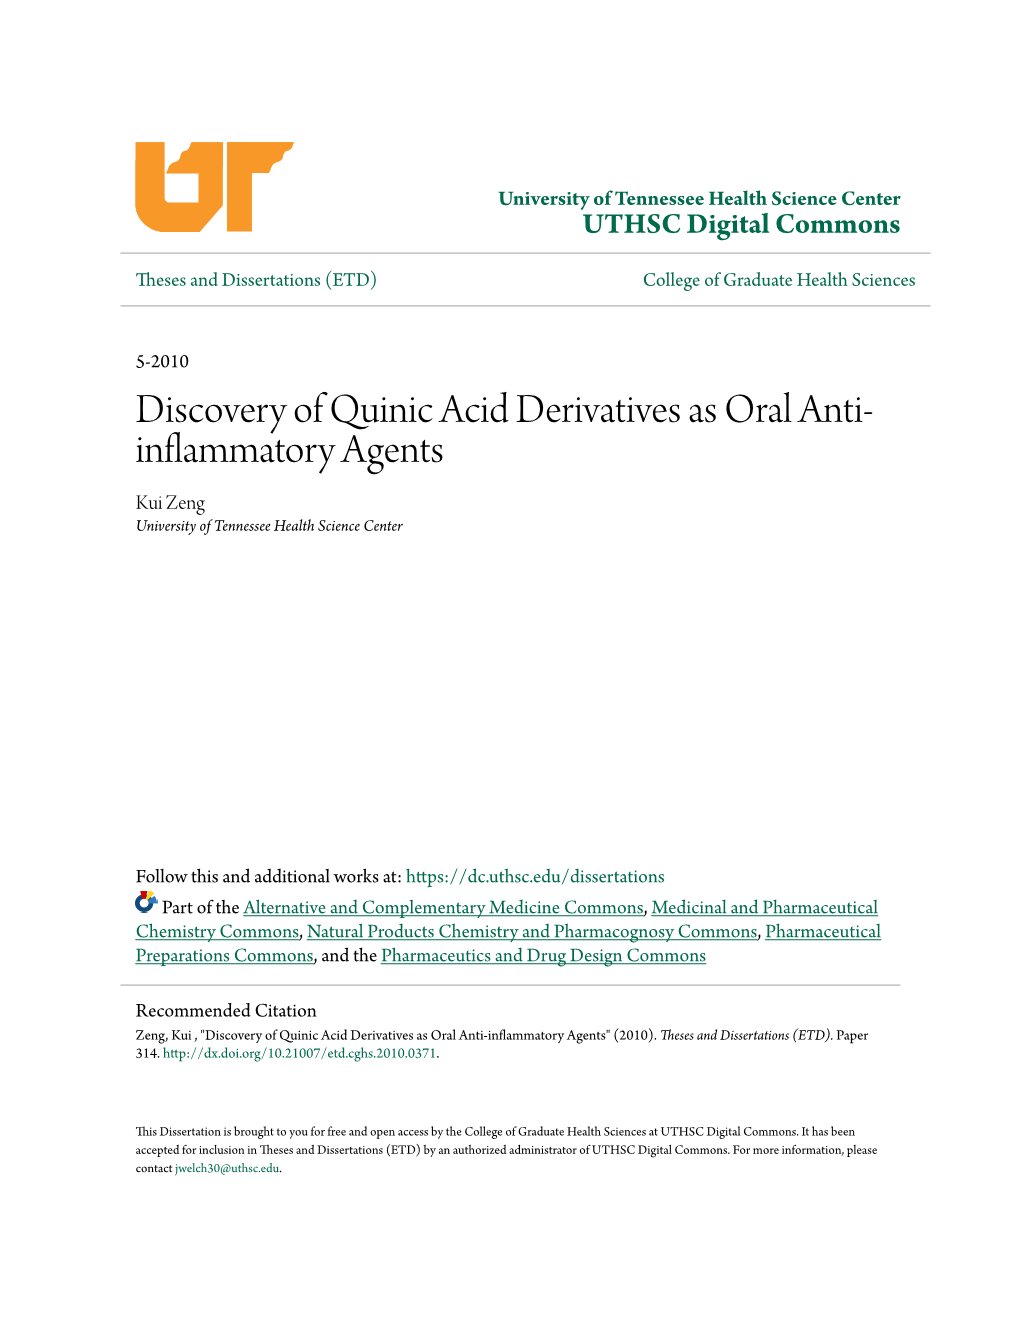 Discovery of Quinic Acid Derivatives As Oral Anti-Inflammatory Agents" (2010)